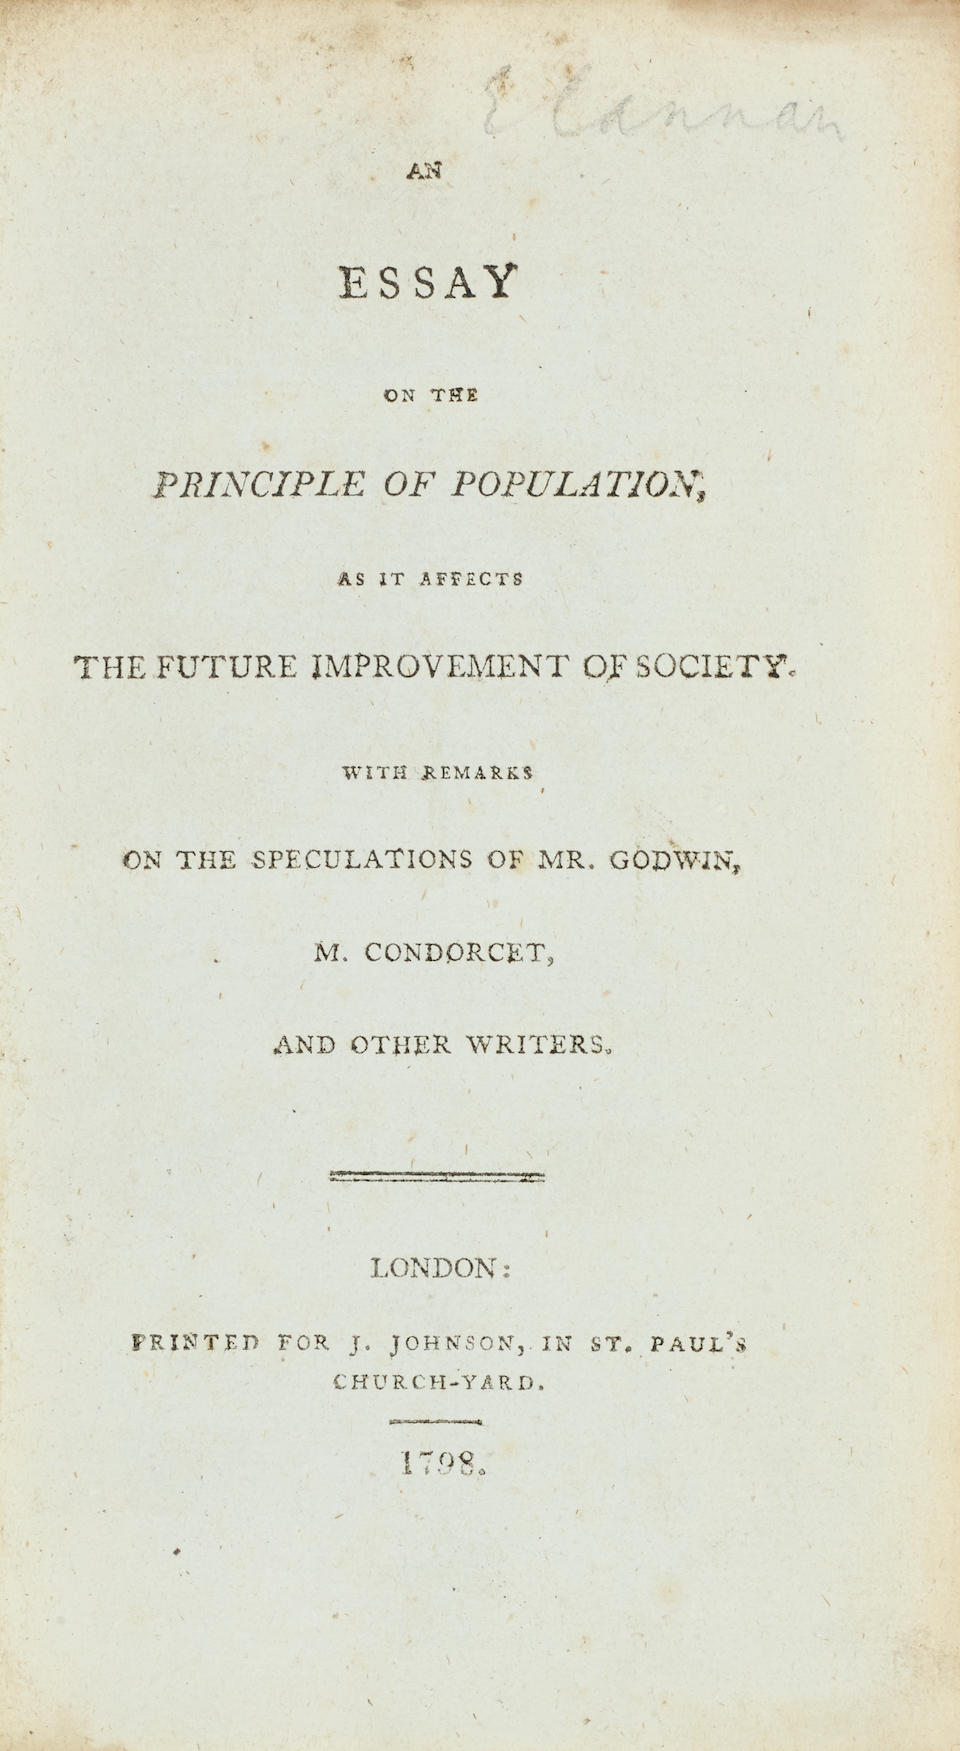 MALTHUS, THOMAS ROBERT. 1766-1834. An Essay on the Principle of Population, as It Affects the Future Improvement of Society.  London: J. Johnson, 1798.